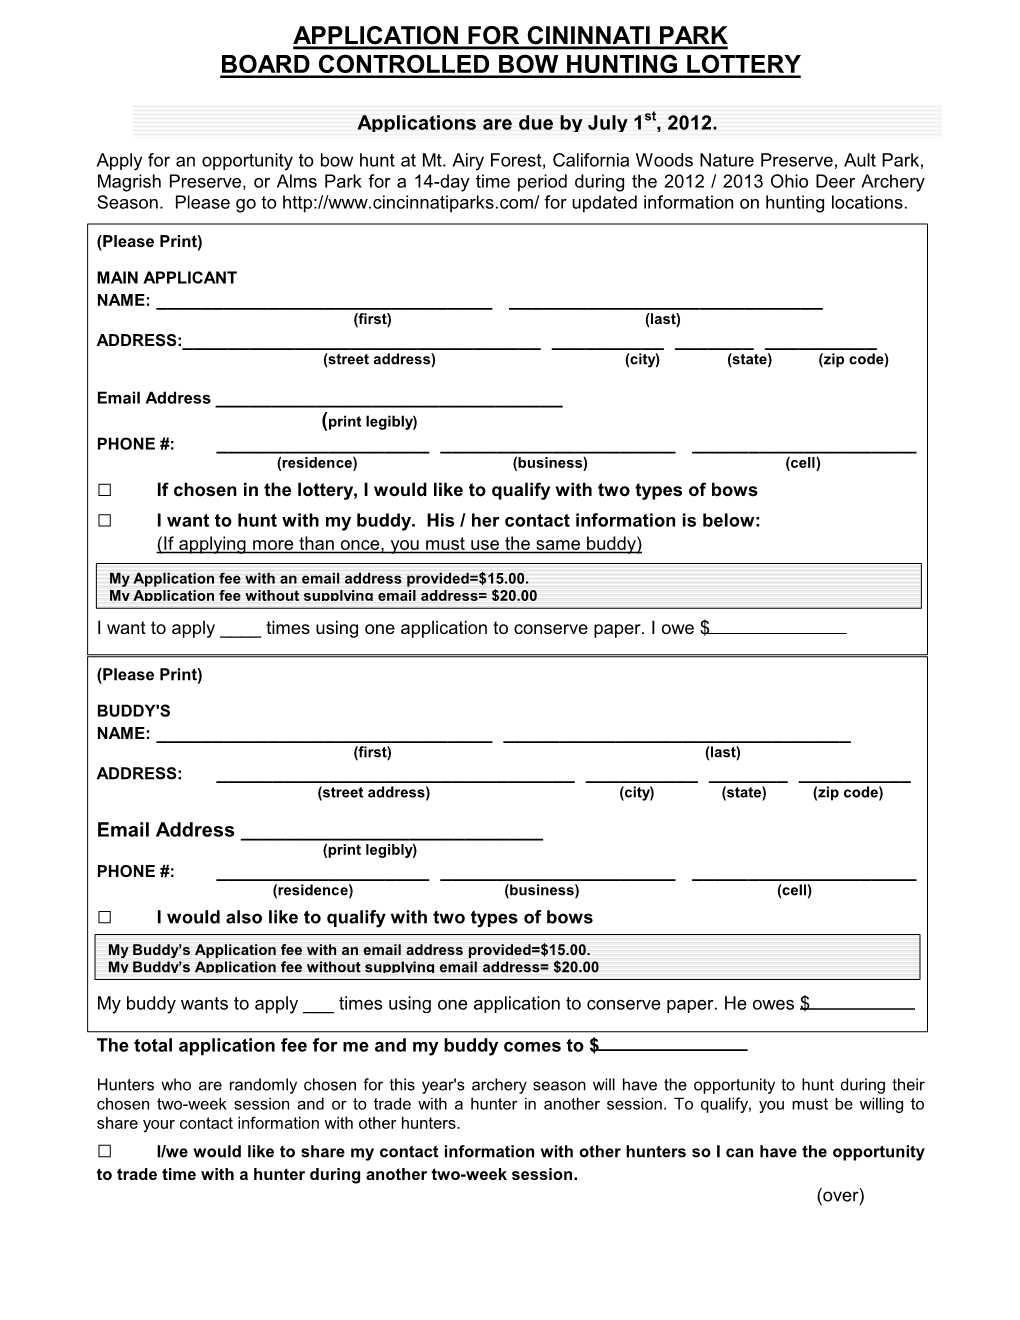 Application for Cininnati Park Board Controlled Bow Hunting Lottery